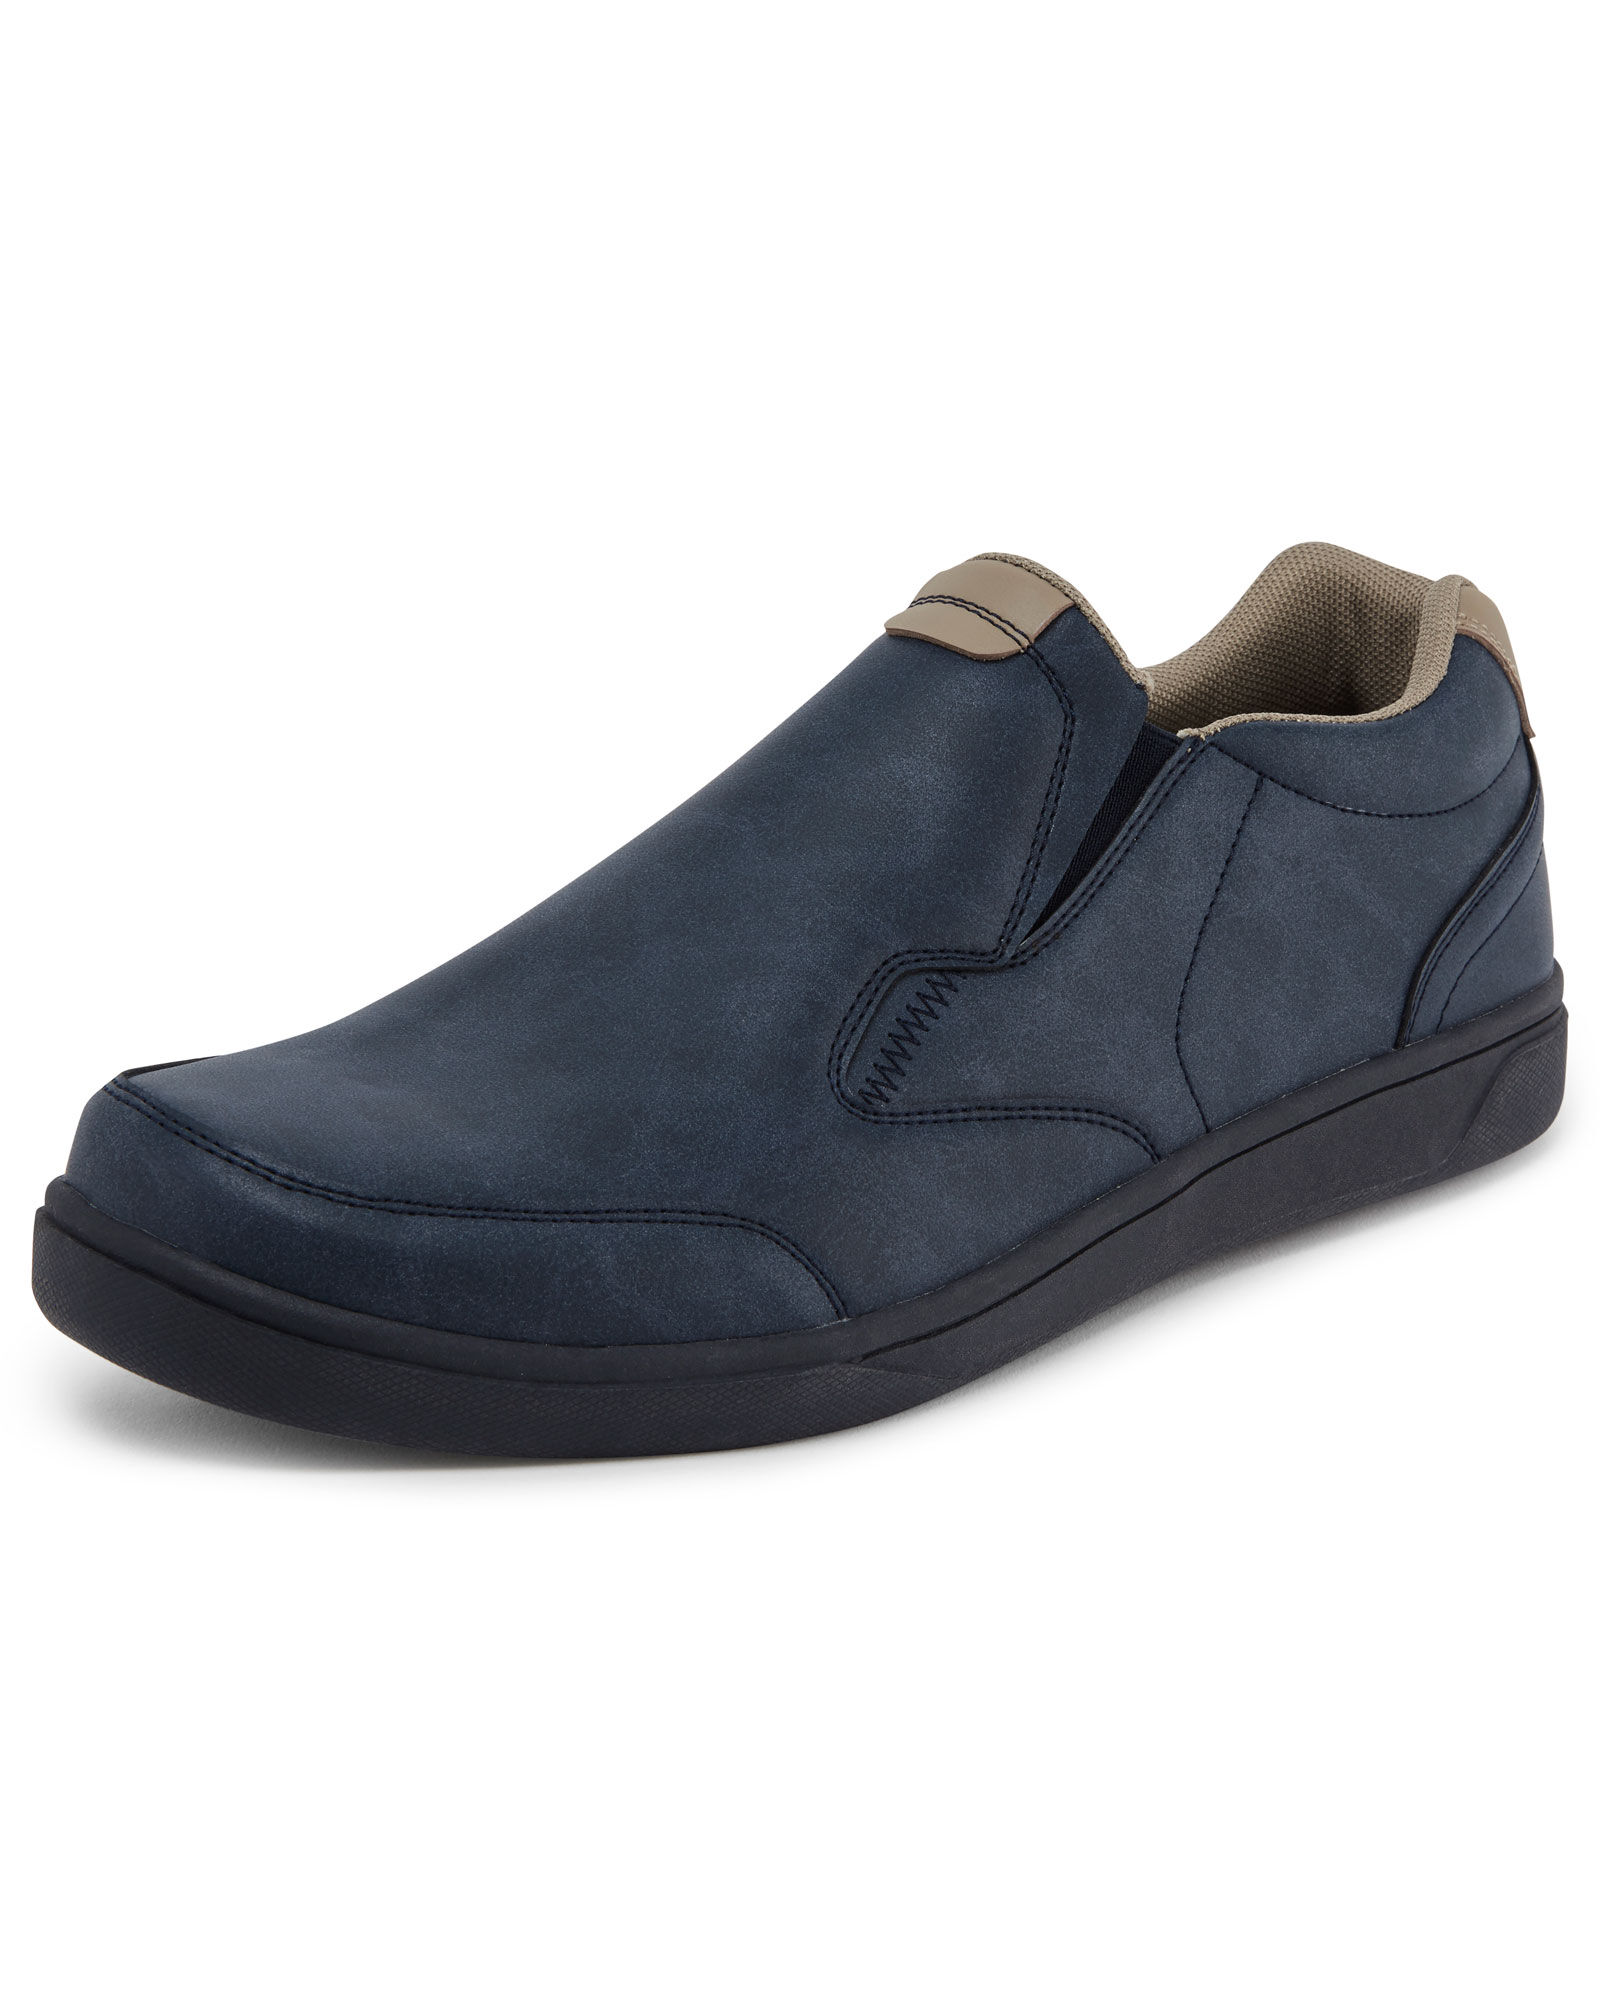 Casual Slip-on Trainers at Cotton Traders